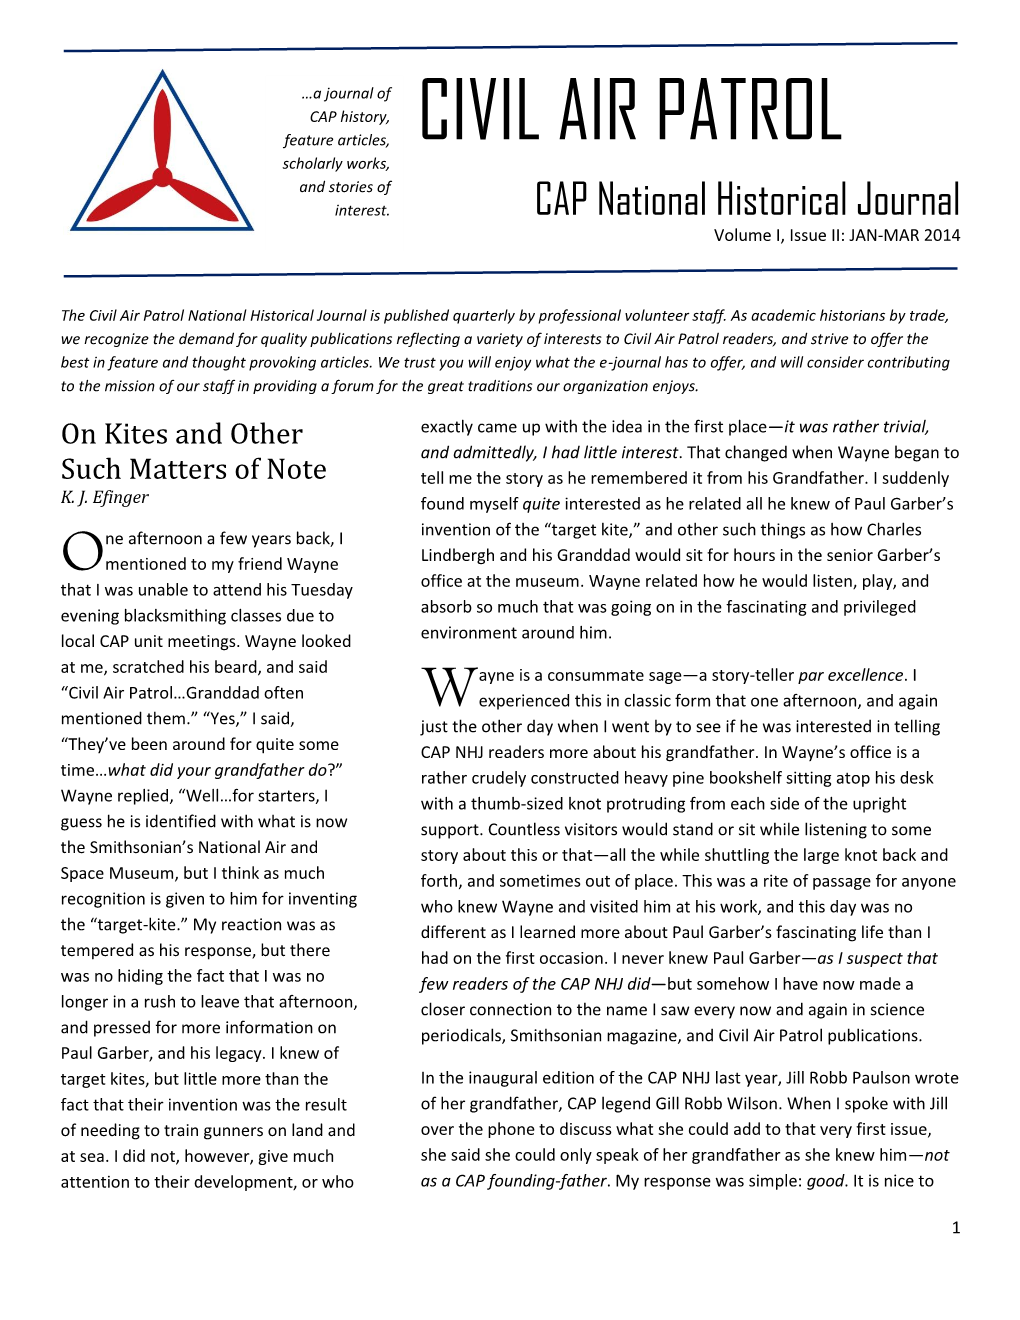 CIVIL AIR PATROL Scholarly Works, and Stories of Interest